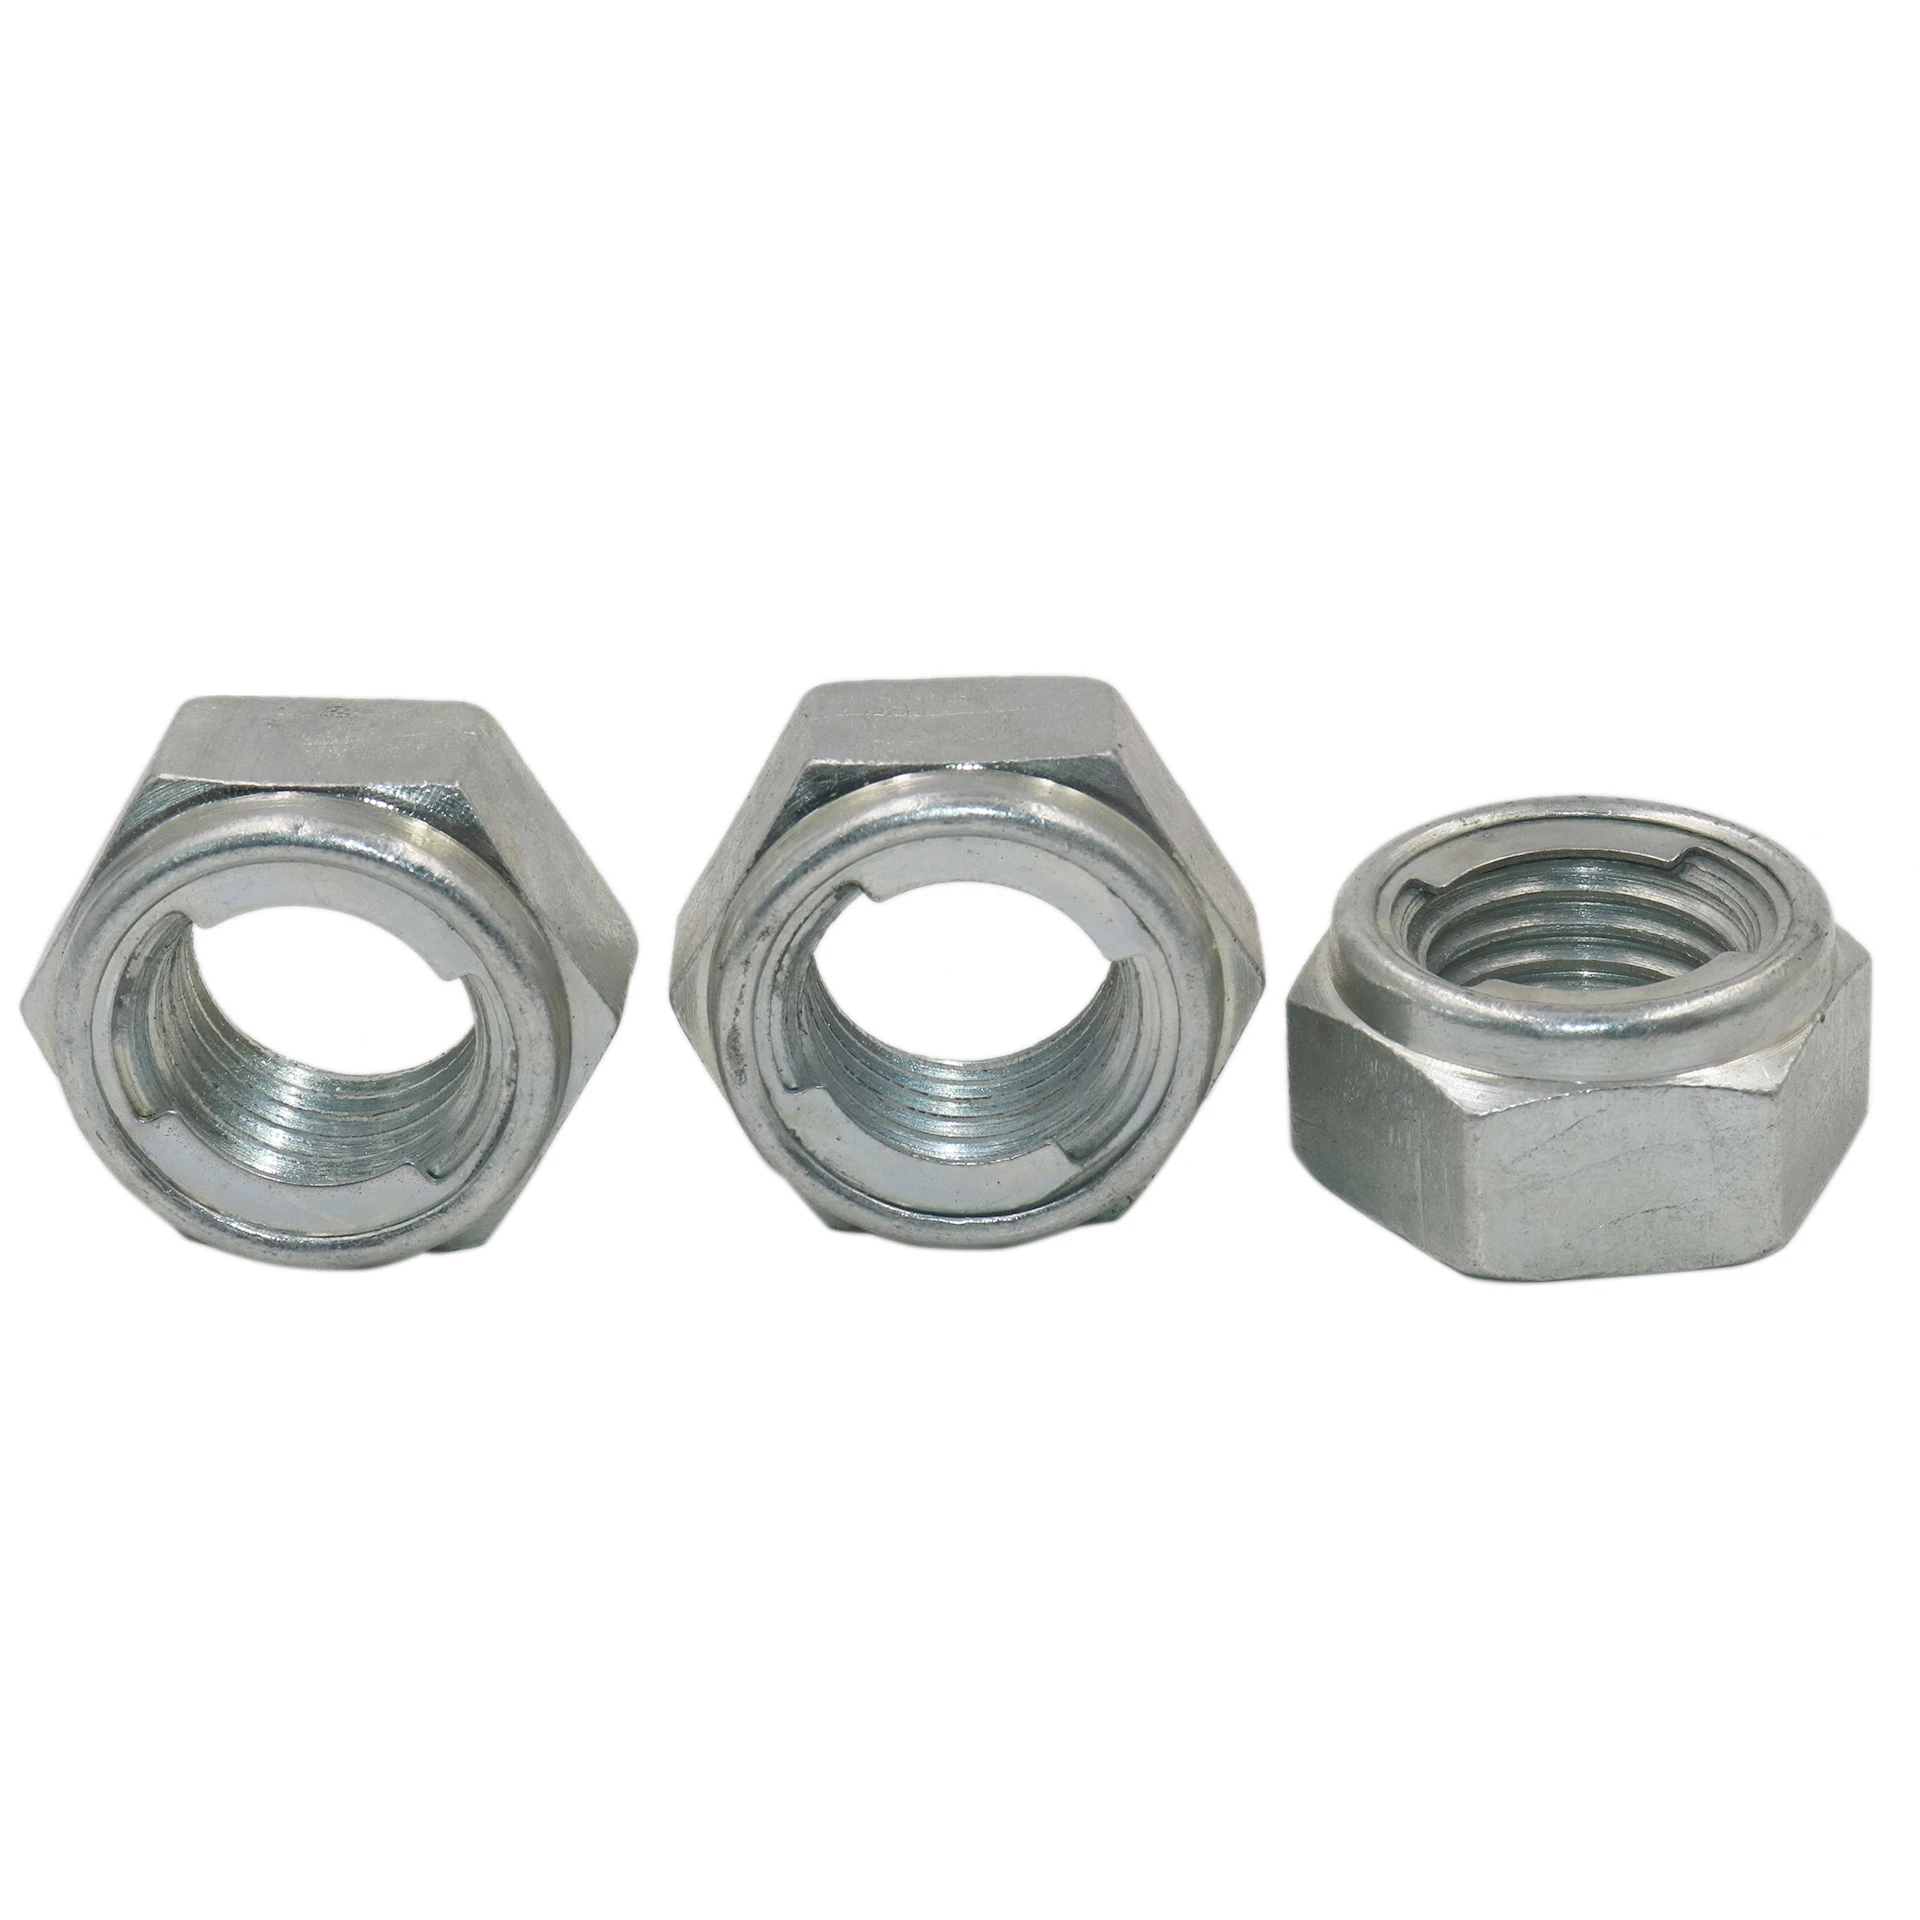 Hex Nuts based on the bulk order quantity